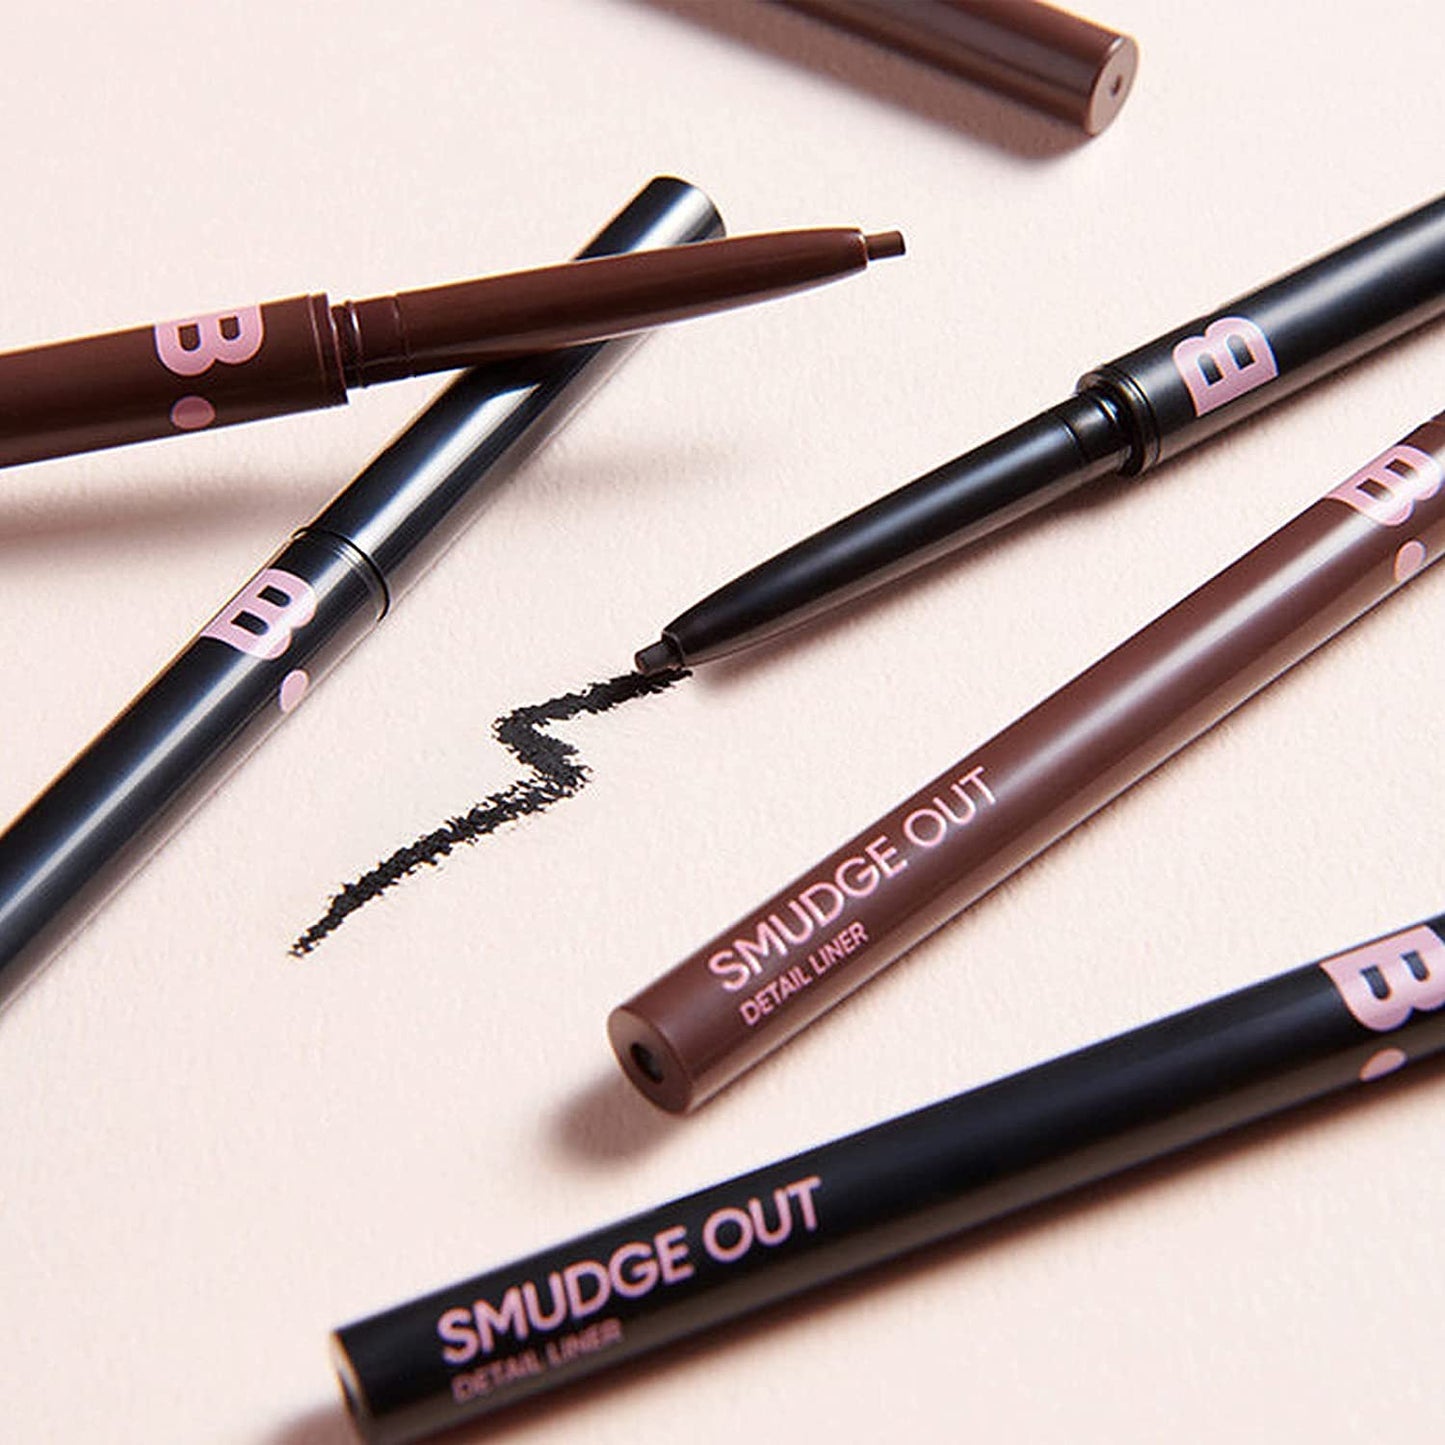 Smudge Out detail Liner 0.1 g (Brown)